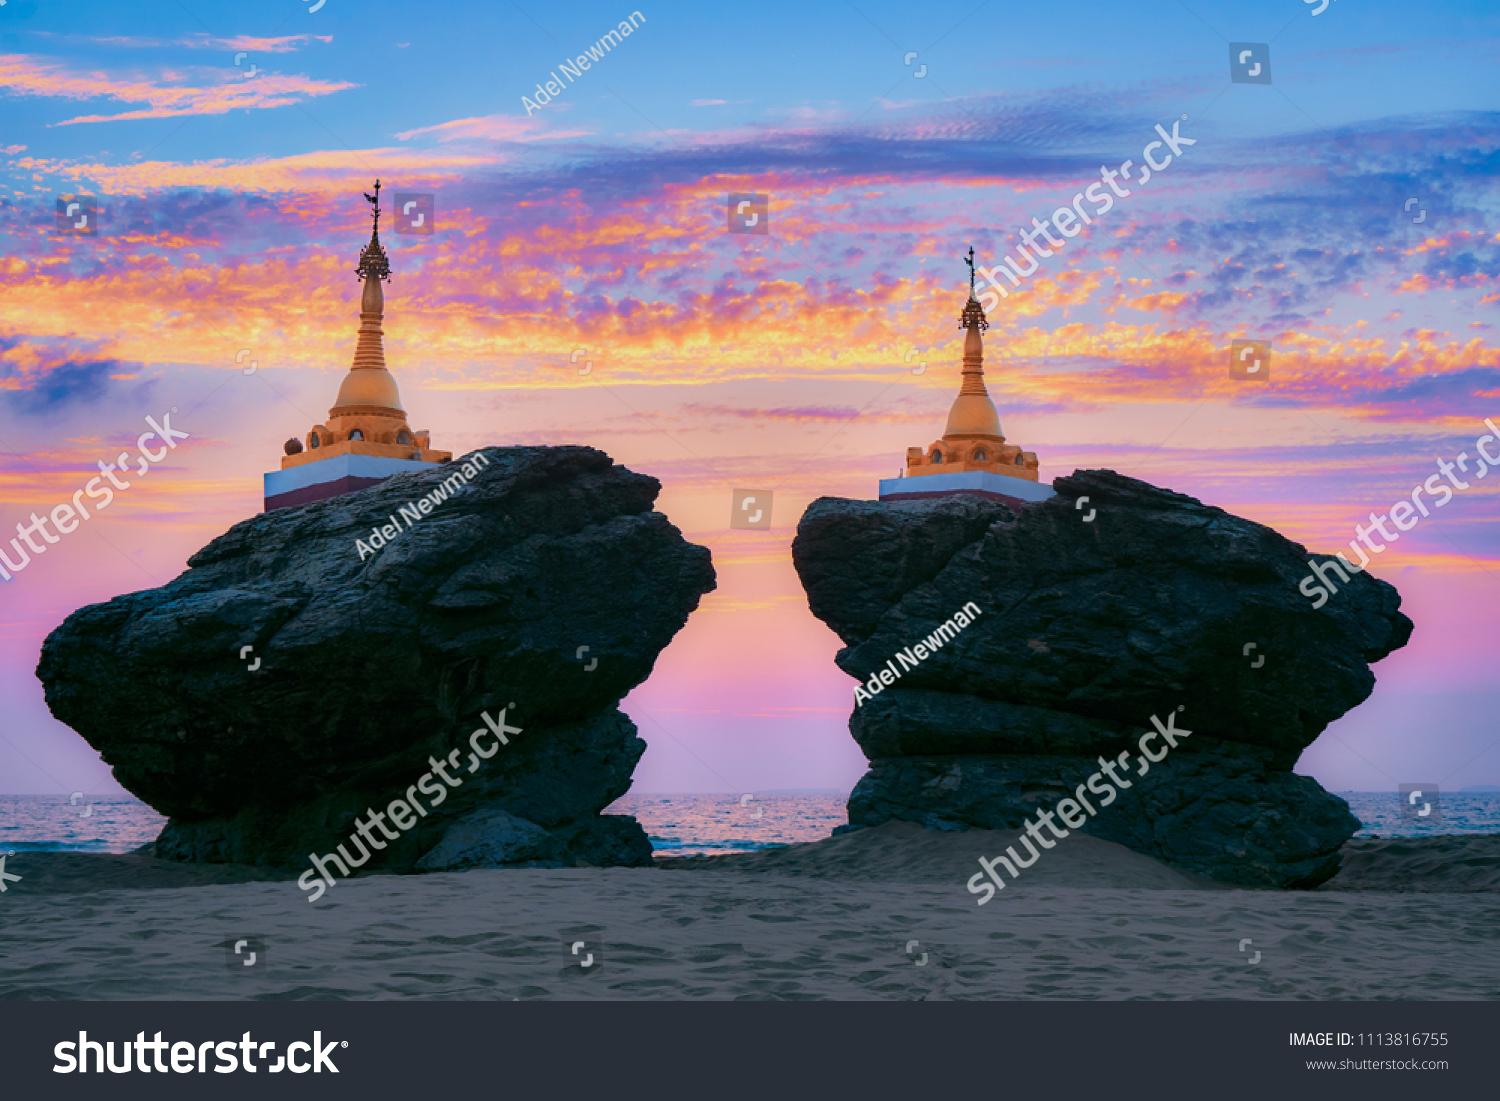 Twin Brother Sister Pagoda Ngwe Saung Stock Photo 1113816755 | Shutterstock